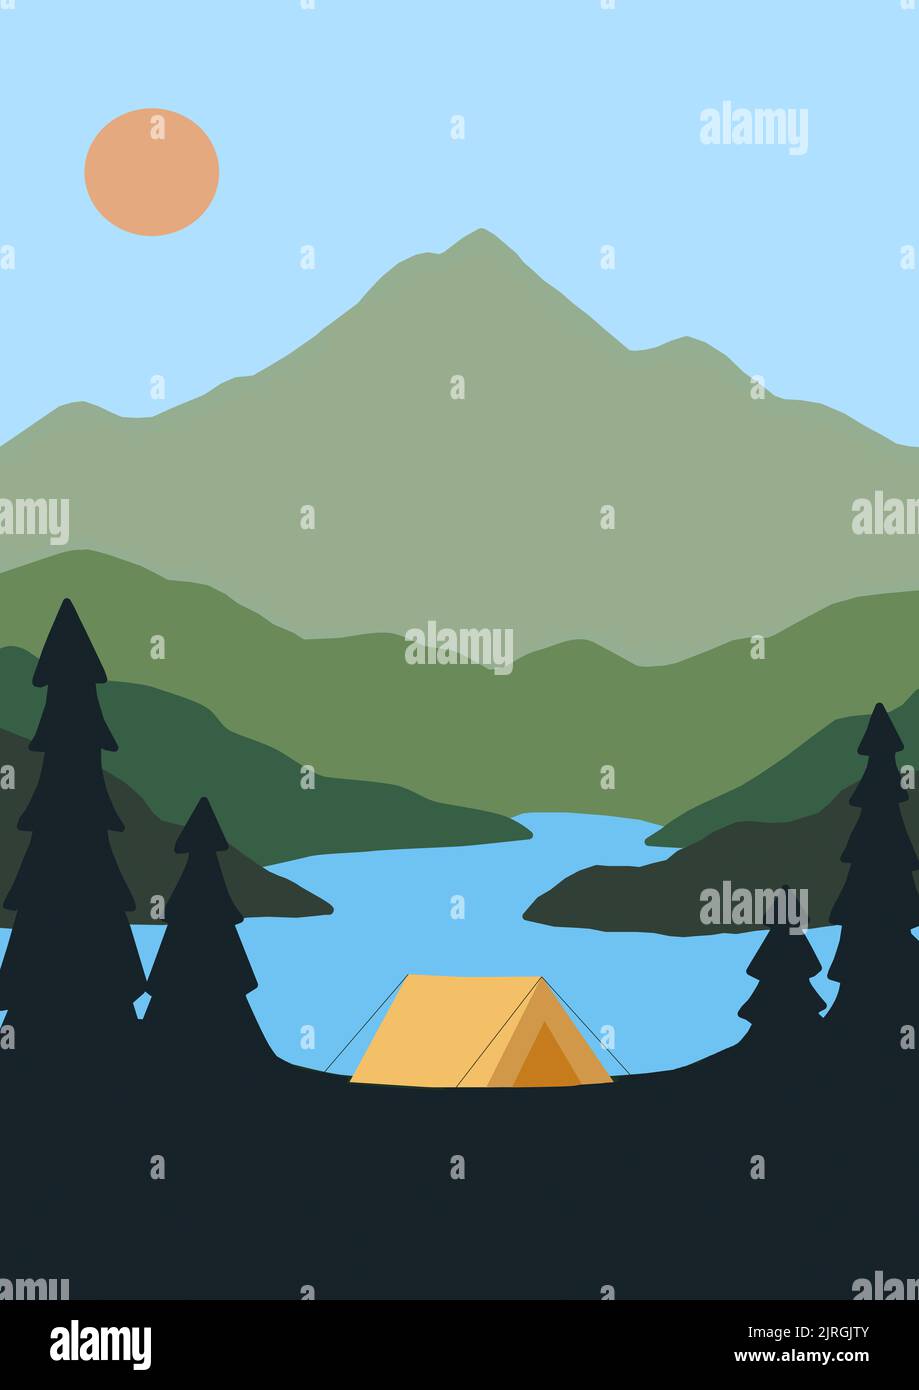 Camping in nature landscape - stock illustration Stock Photo